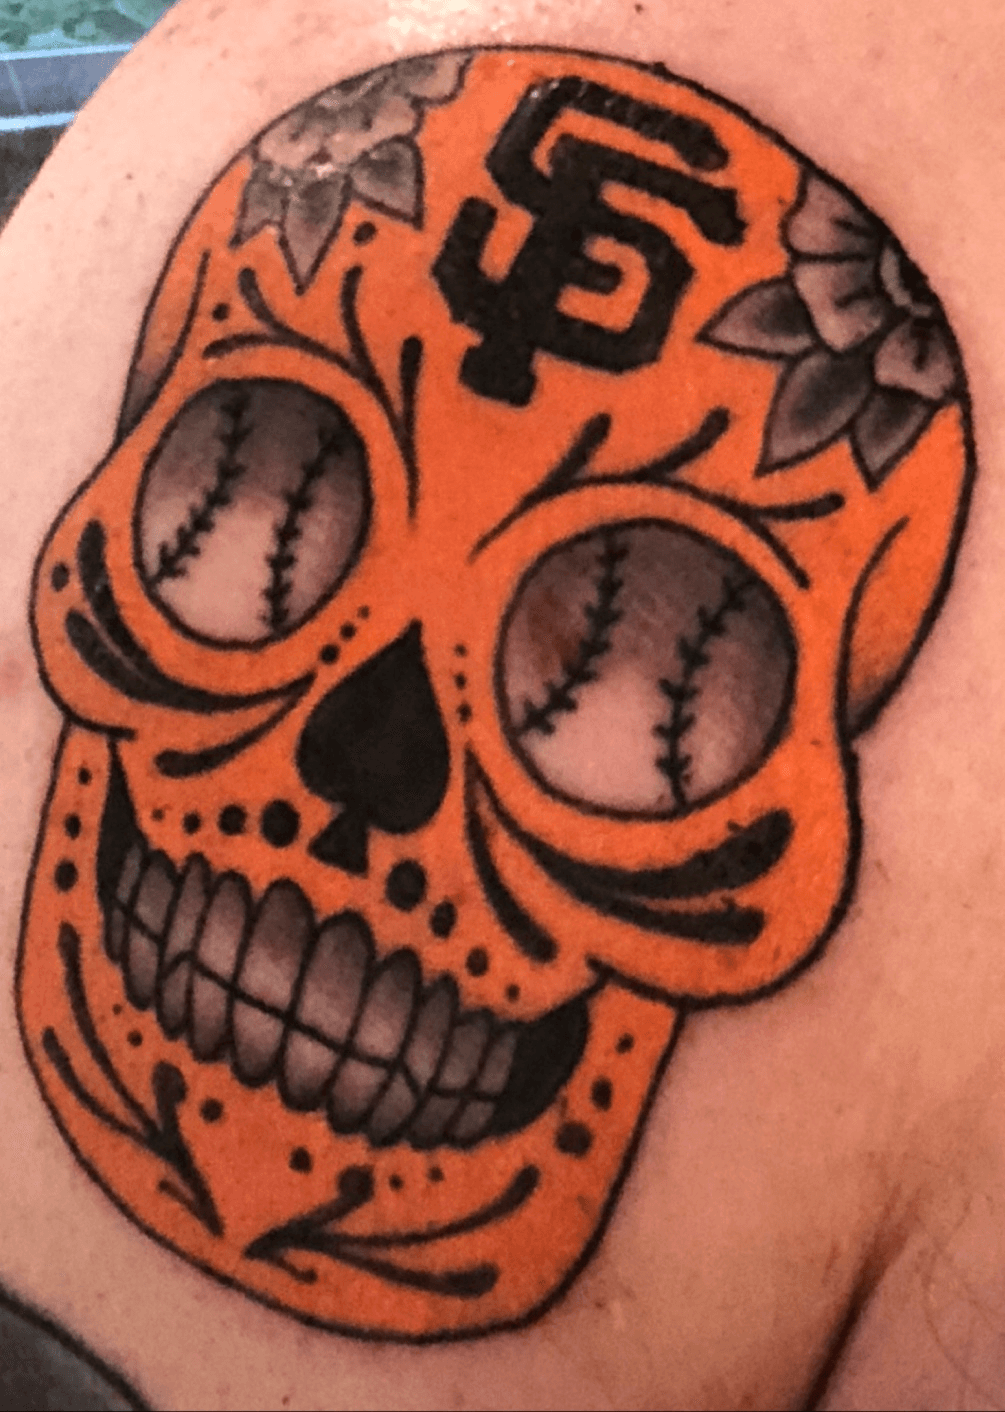 Take a guided tour of Dereck Rodríguezs tattoos  McCovey Chronicles